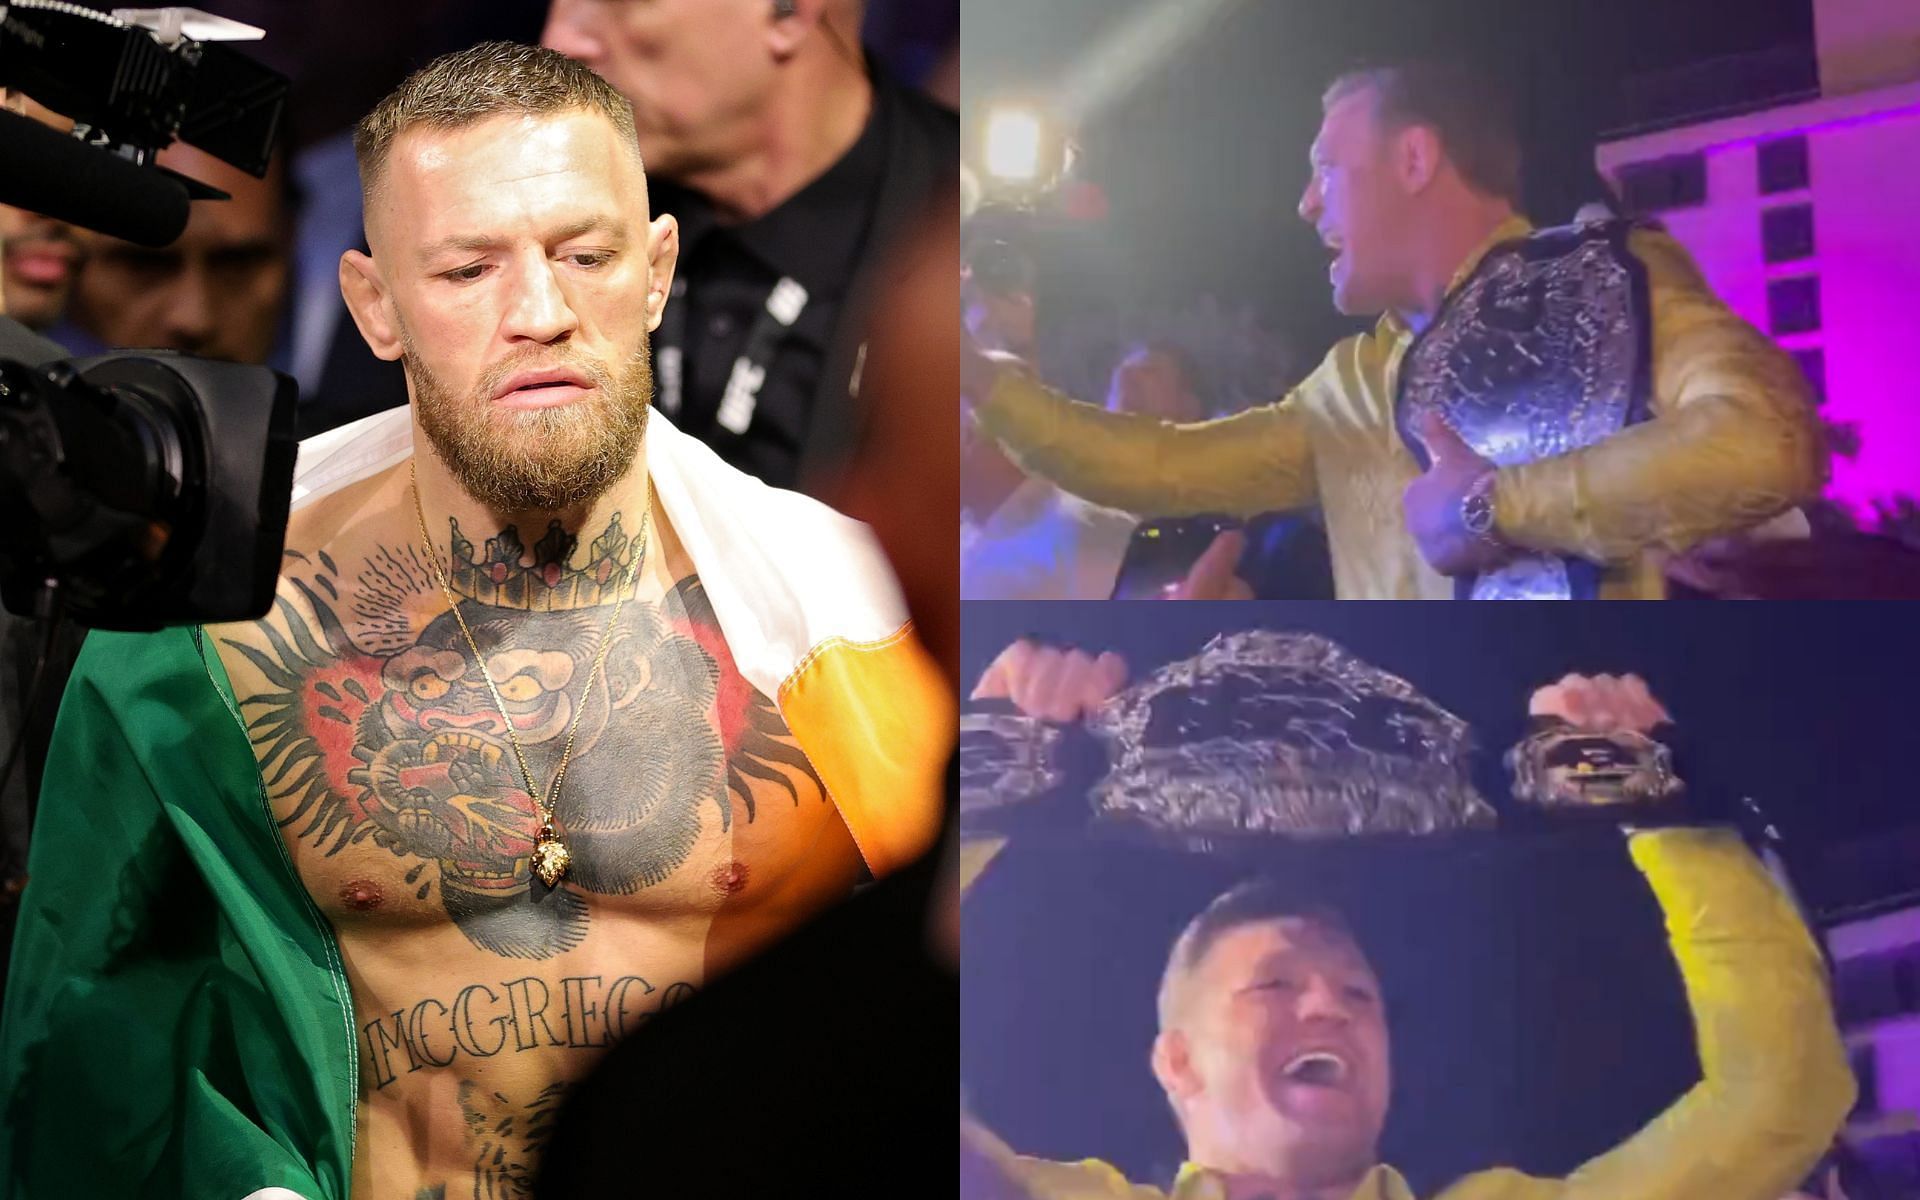 Conor McGregor (Left), McGregor partying at the Abu Dhabi GP (Top and Bottom Right) [Image courtesy: left image via Getty Images; top and bottom right images via @FullCombat_Twitter]